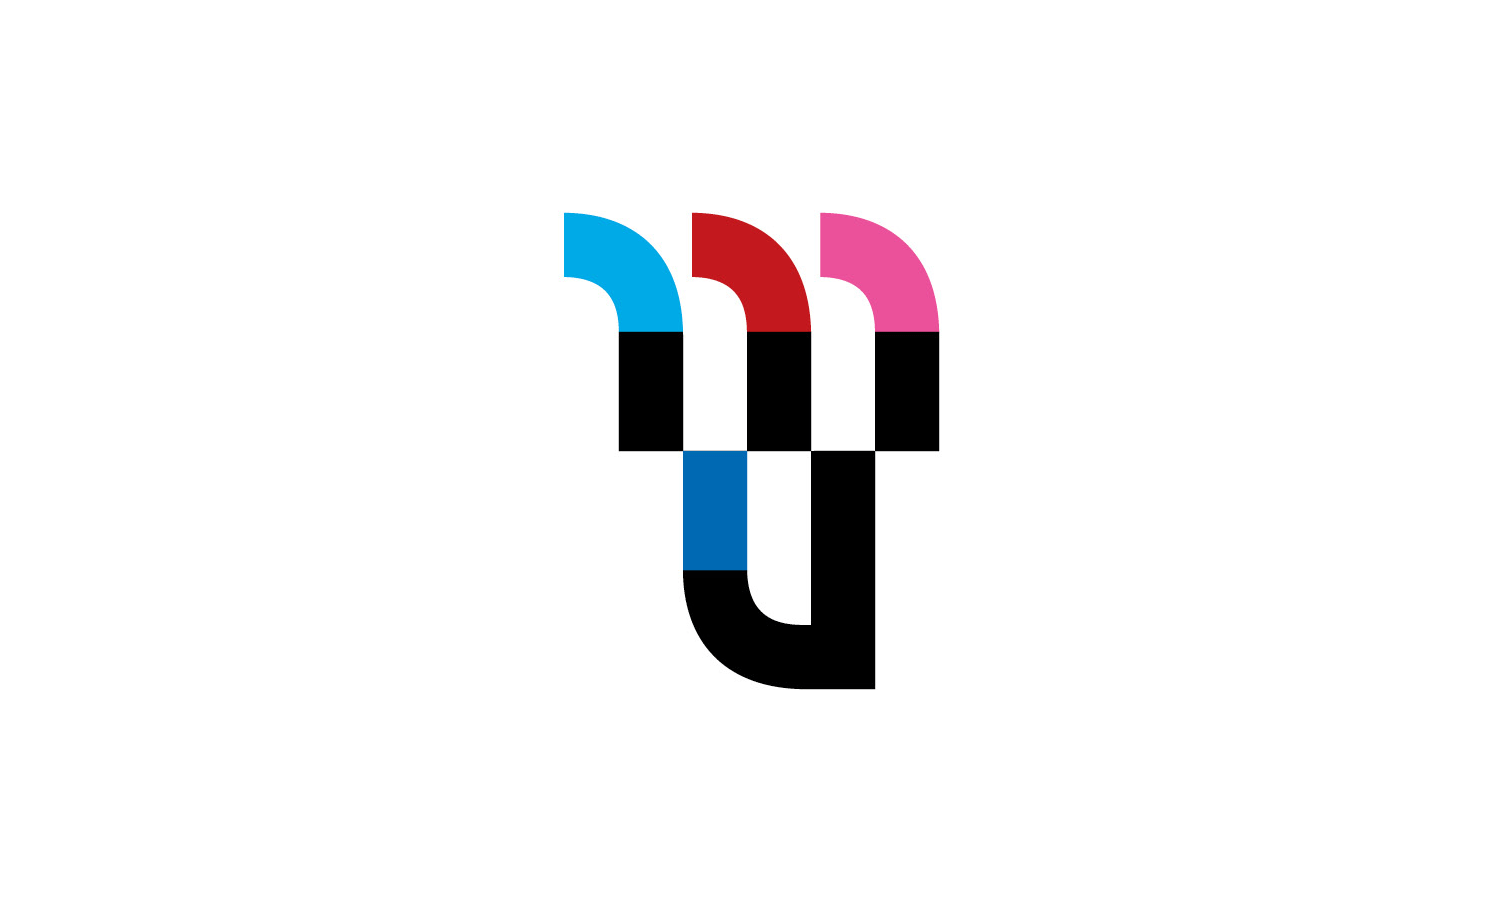 New Logo and Identity for Move United by Superunion